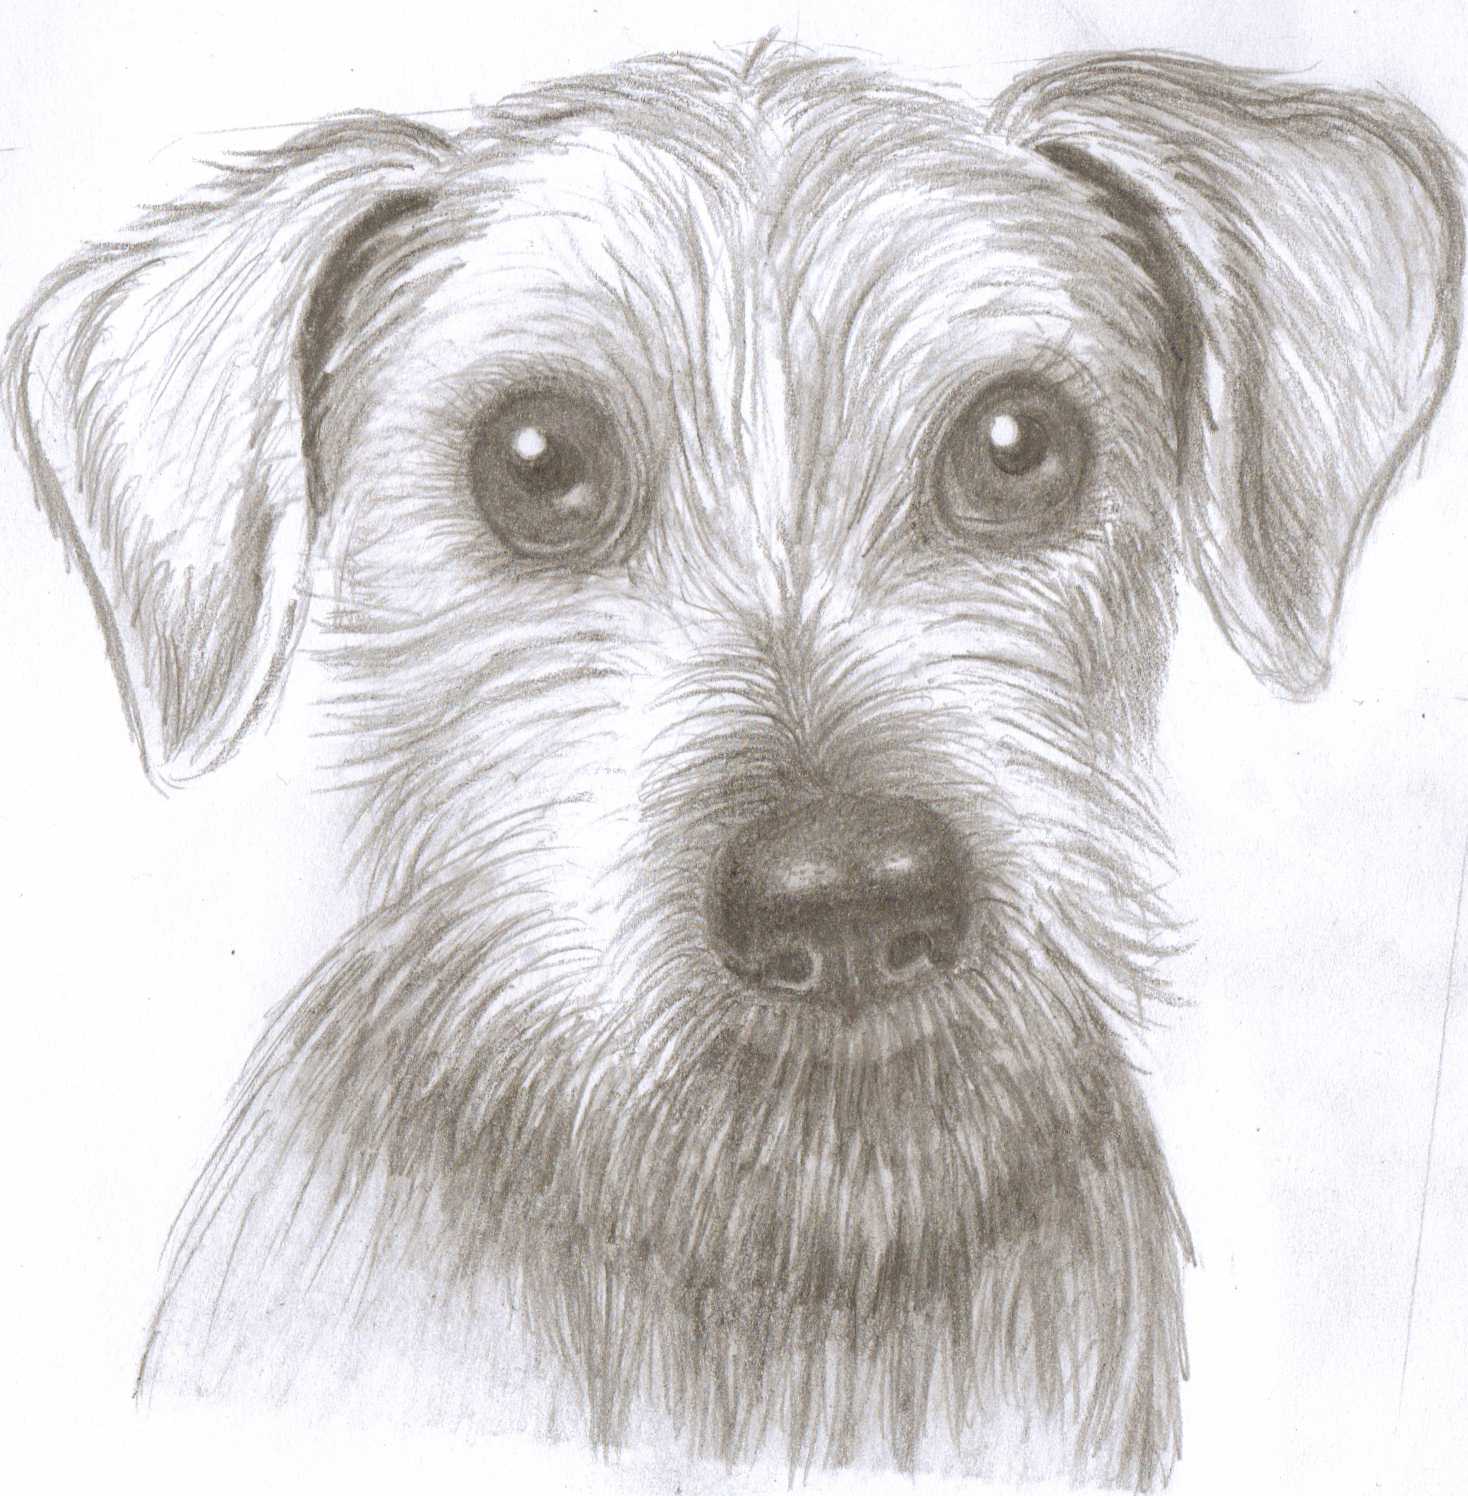 Dog Face Drawing - Gallery